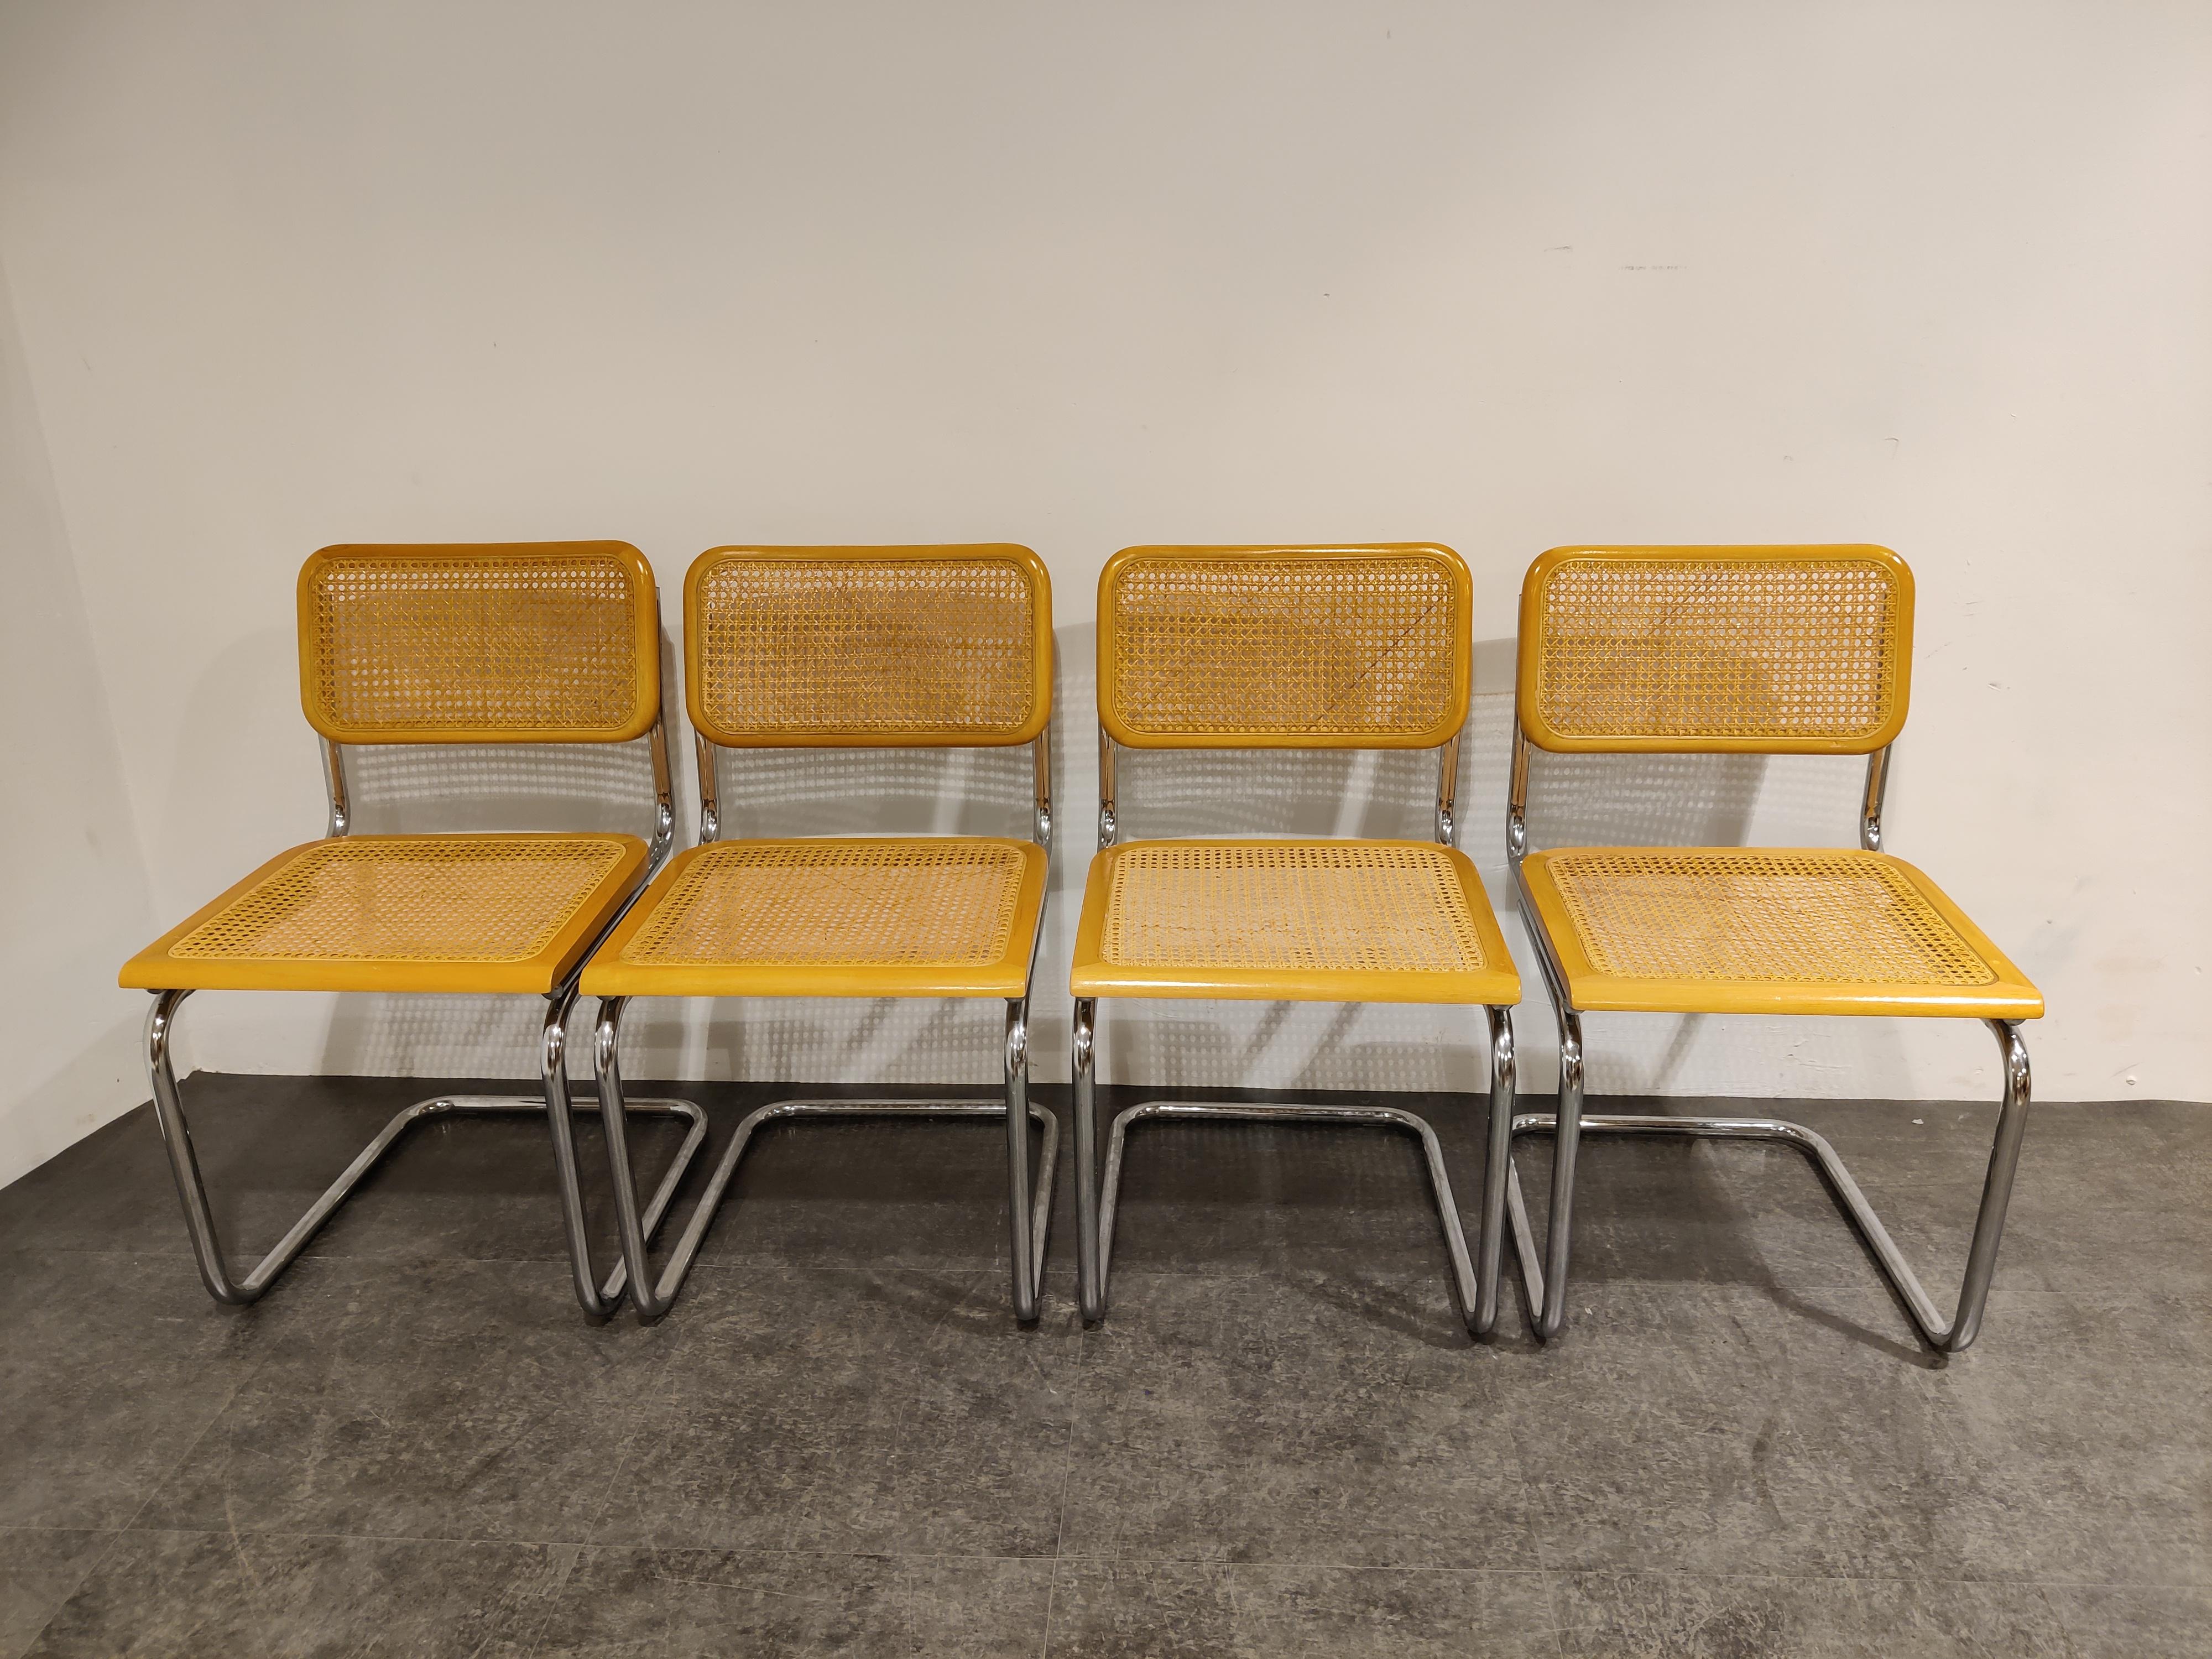 Marcel Breuer style Cesca Bauhaus design chairs. 

Good condition.

Very popular design which mixes well with most interiors. The Bauhaus design never gets old,

1970s, Italy

Dimensions:
Height: 80cm/31.49